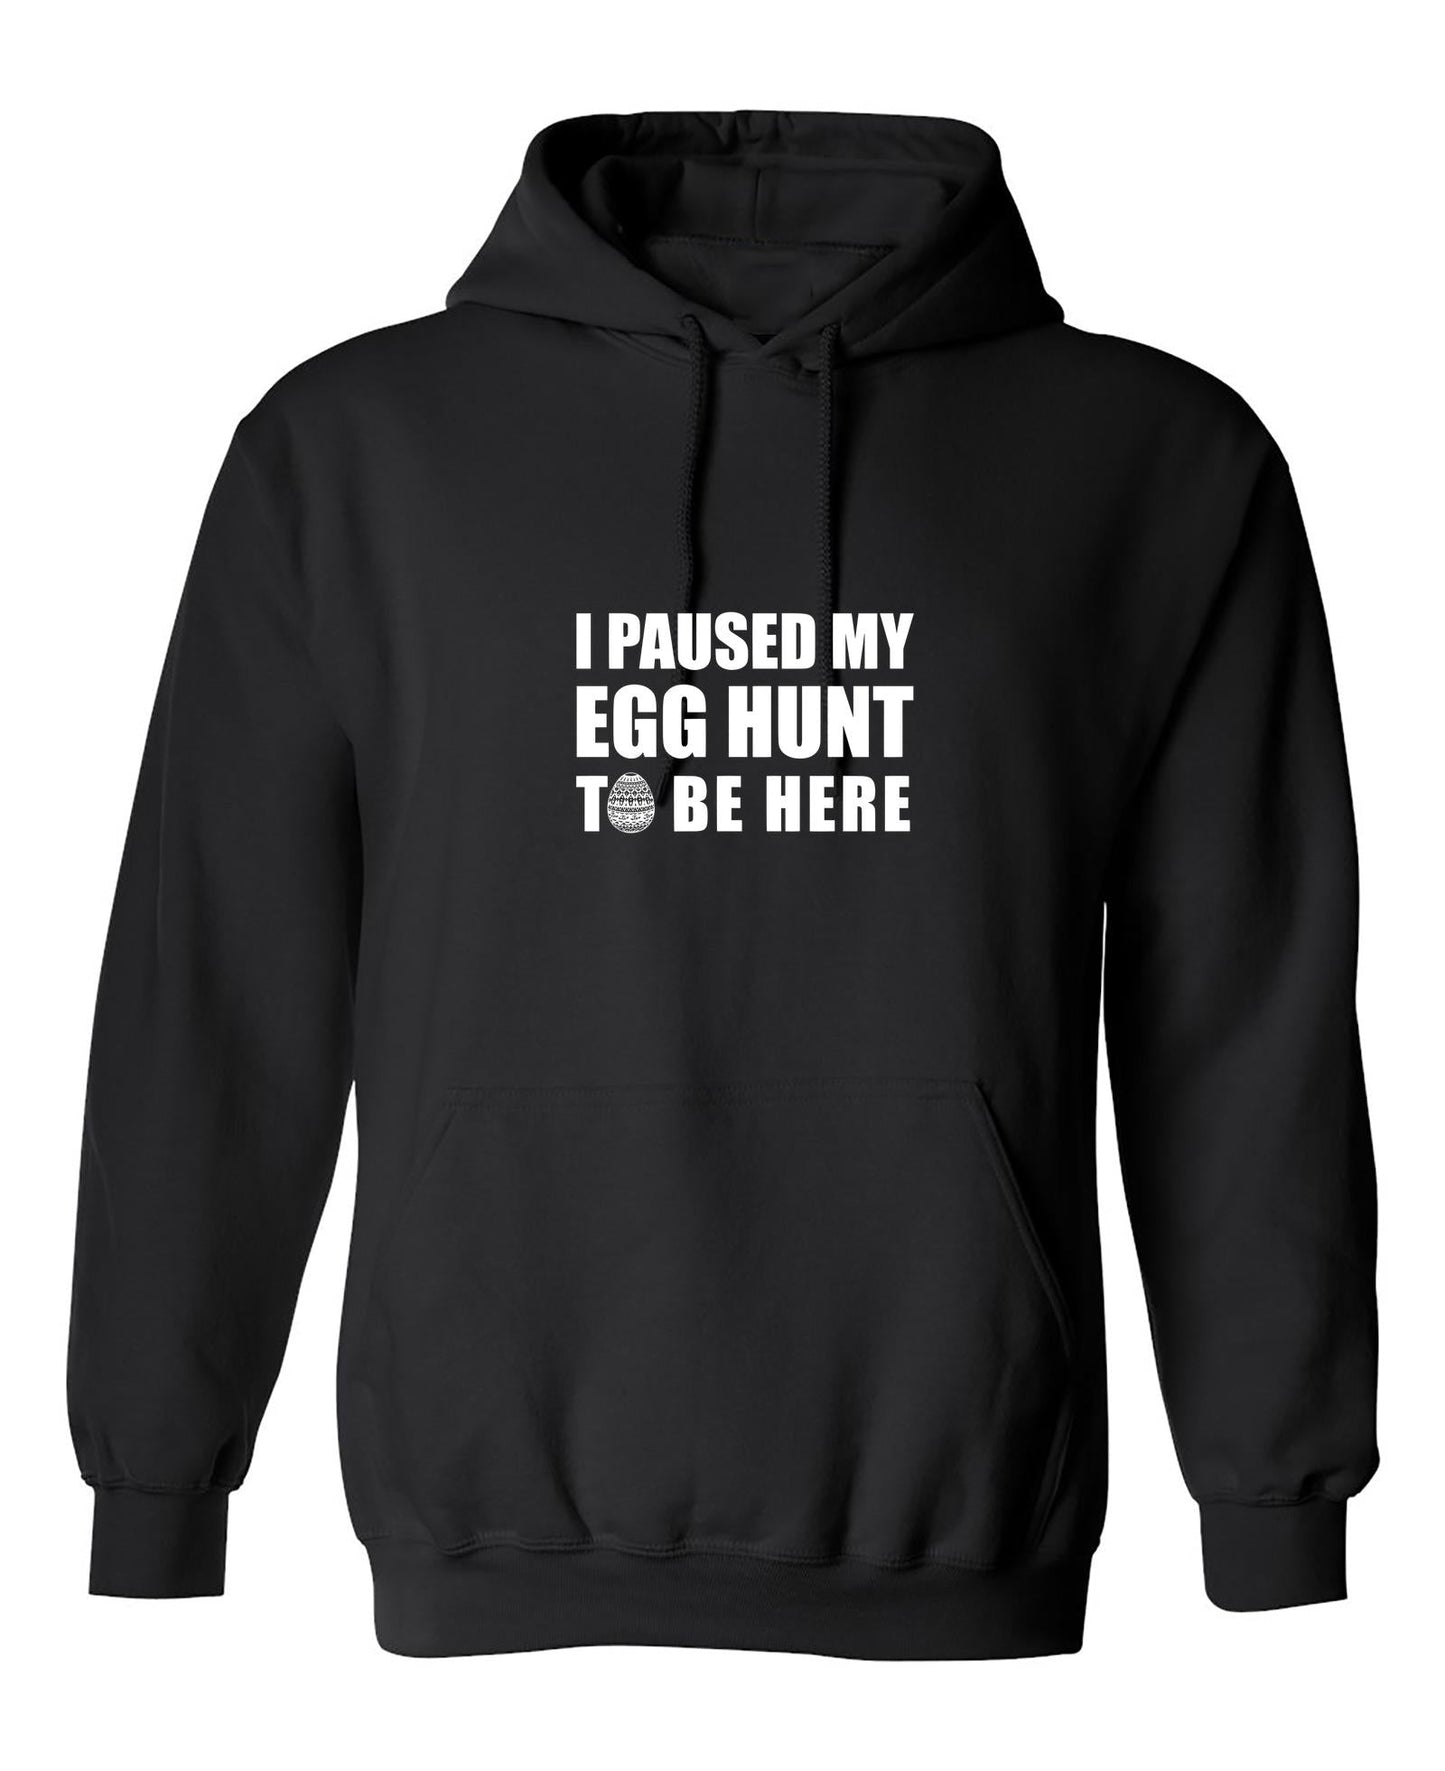 Funny T-Shirts design "PS_0468_PAUSE_EGG_GAMER BUNNY"